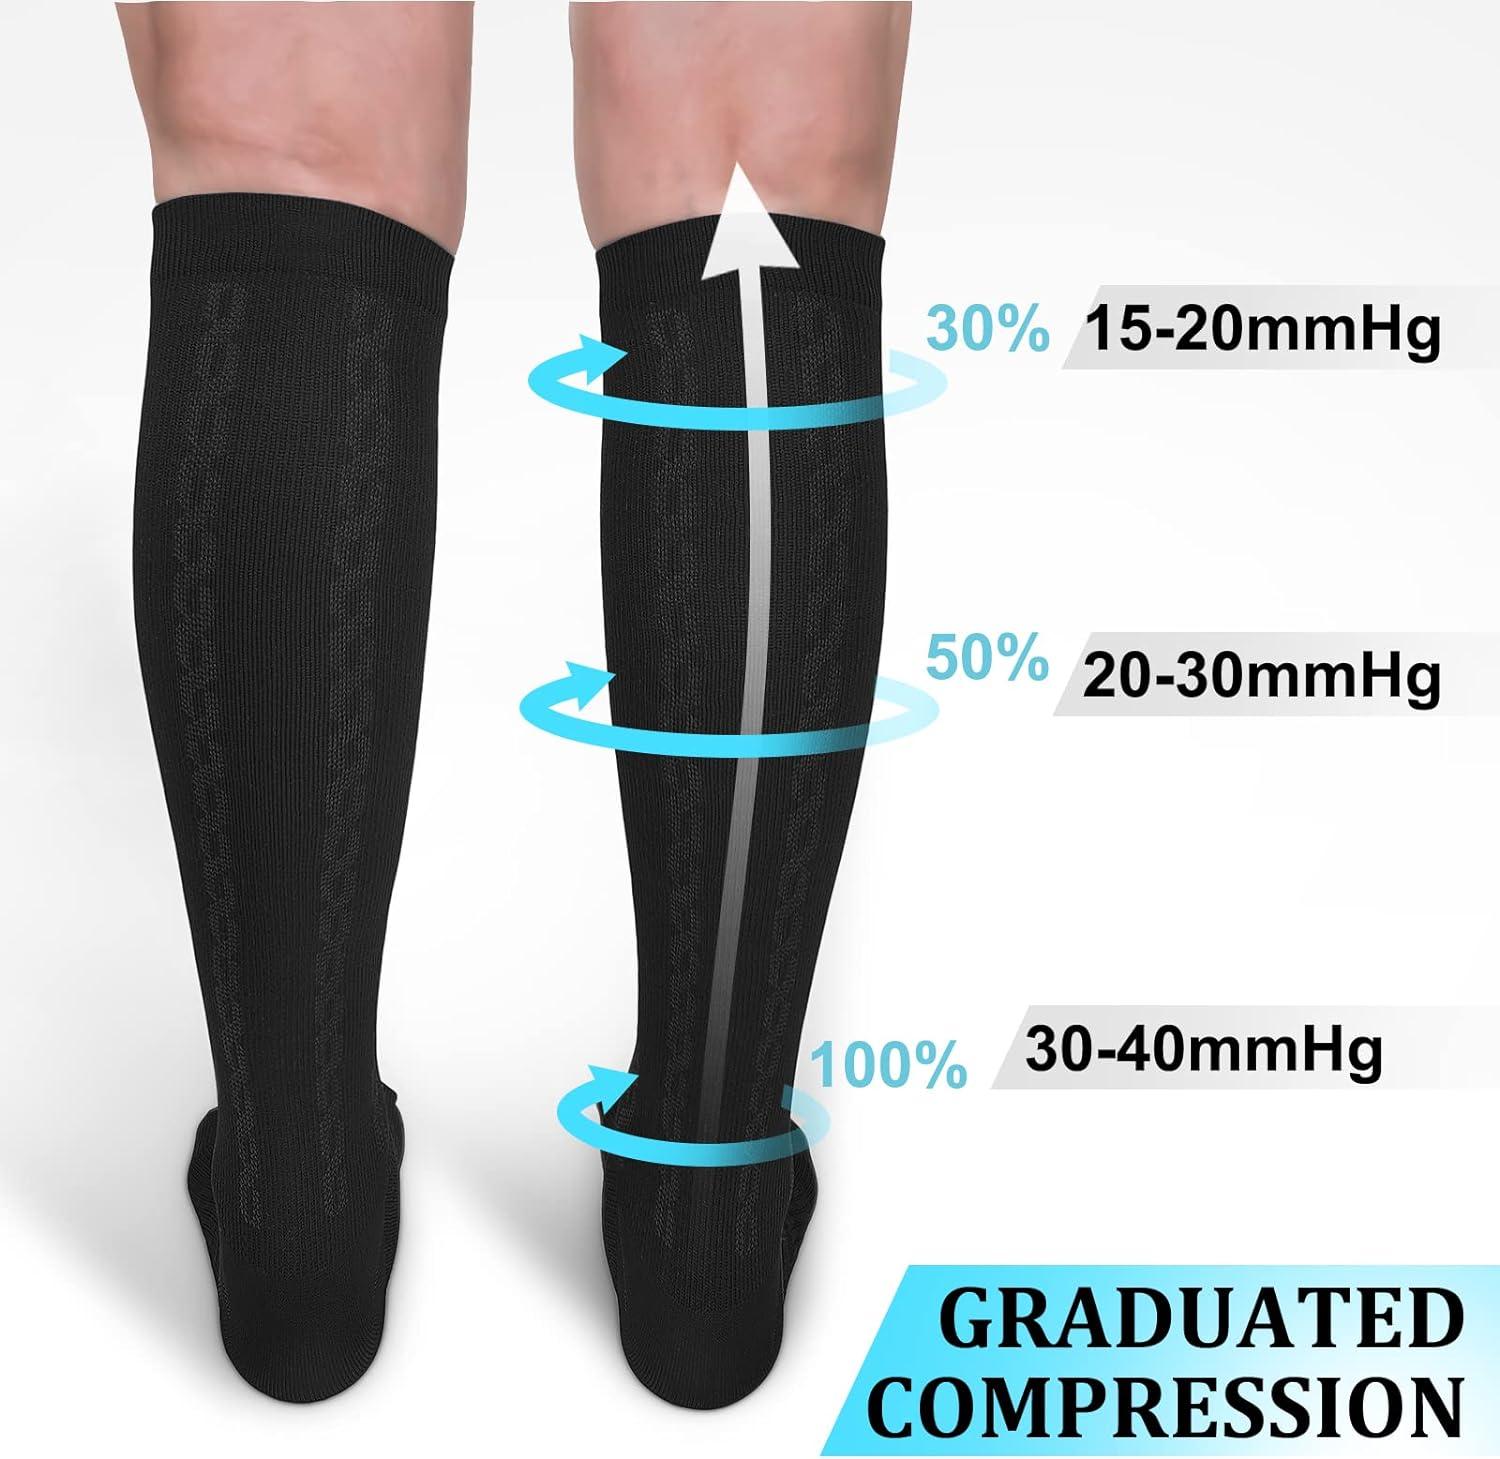 30-40mmHg Medical Graduated Compression Socks for Women&Men Circulation-Compression  Stockings-Knee High Socks for Support Hiking Running 1-2 Pack Black  Large-X-Large